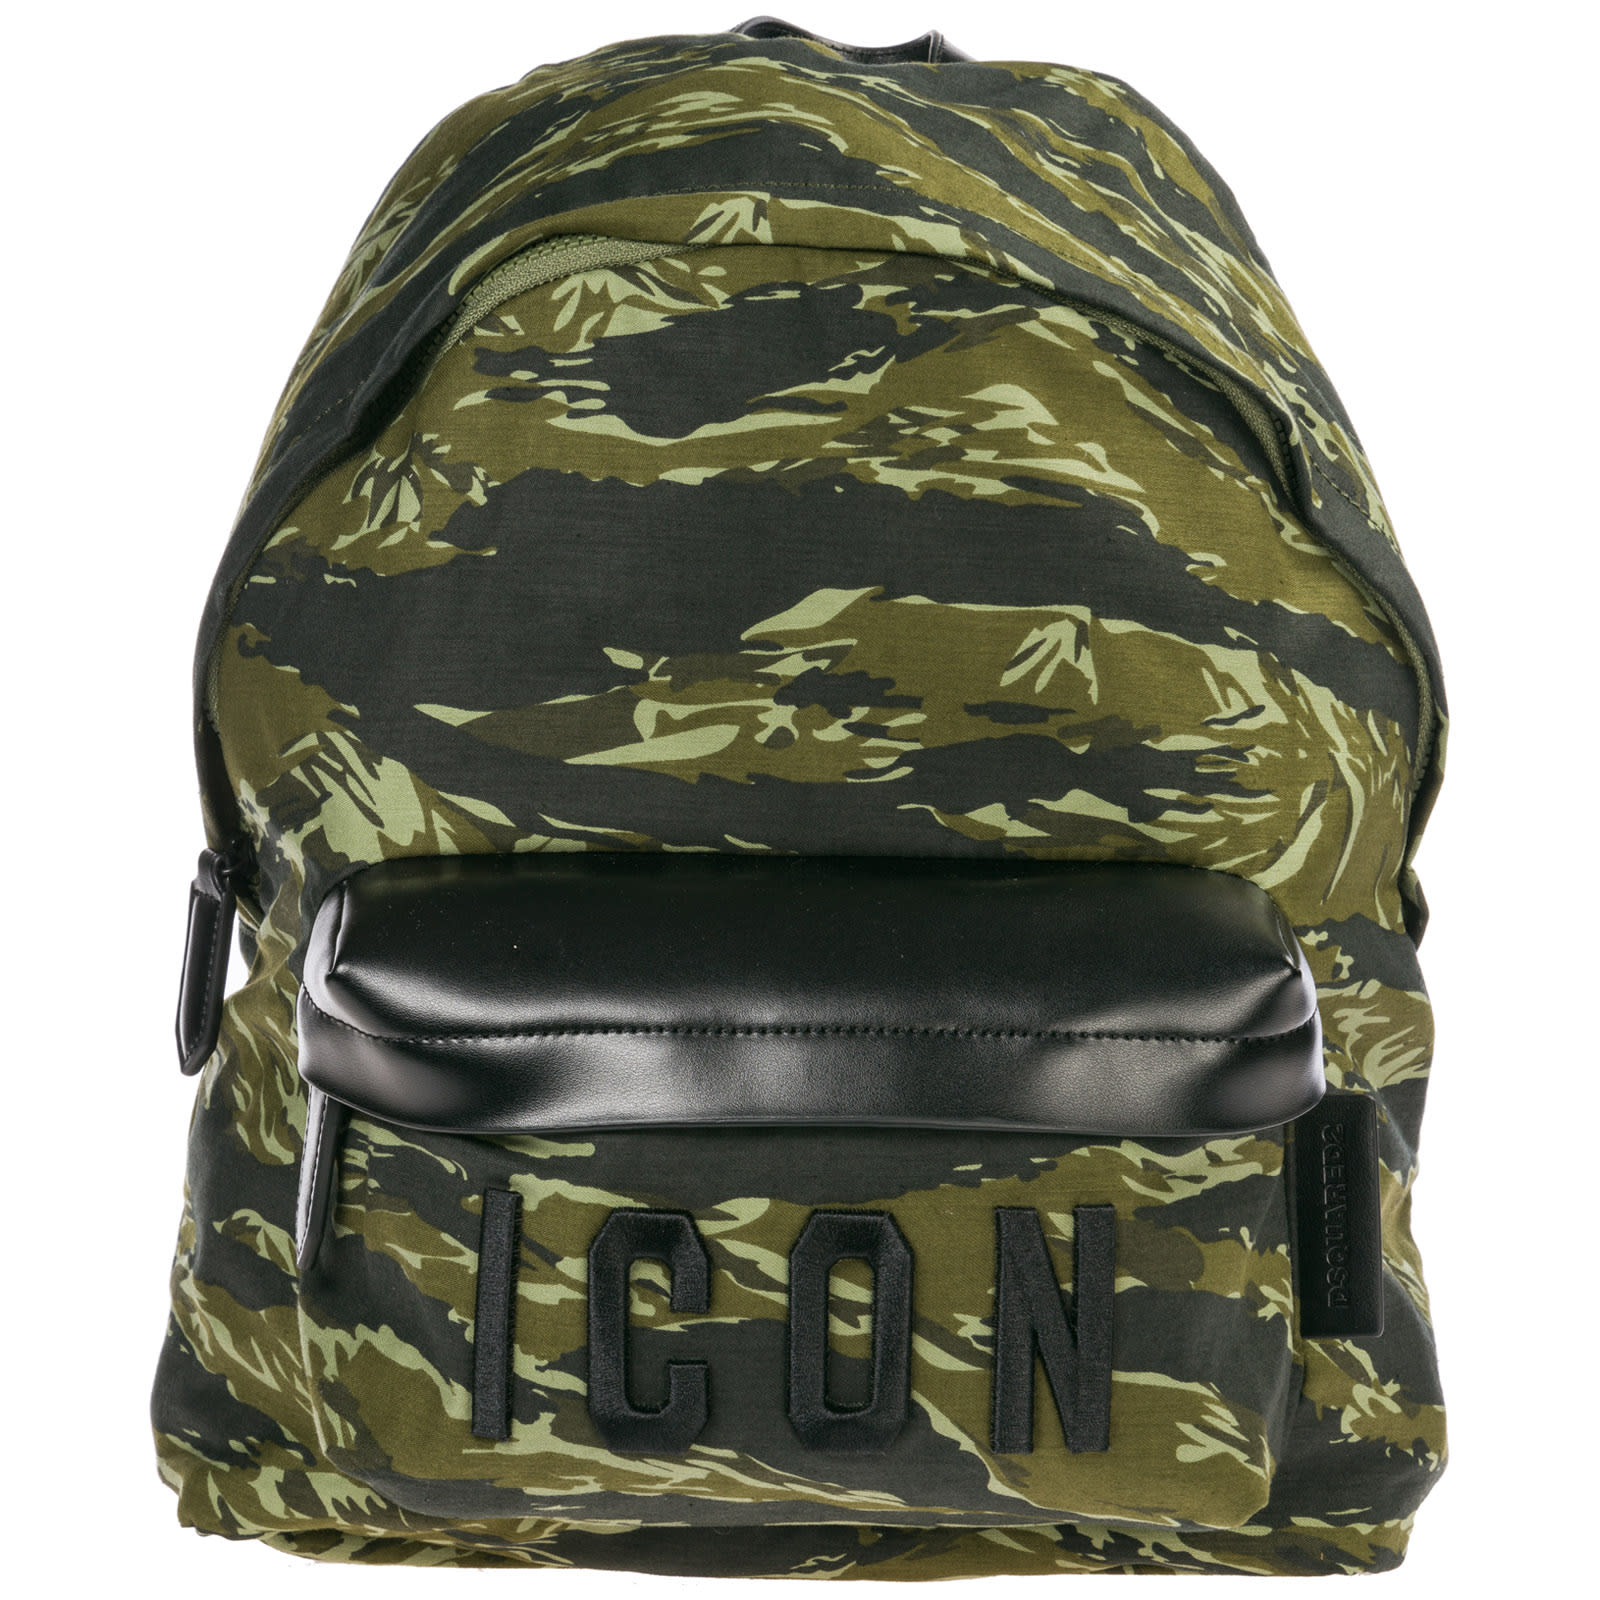 dsquared 251 camouflage